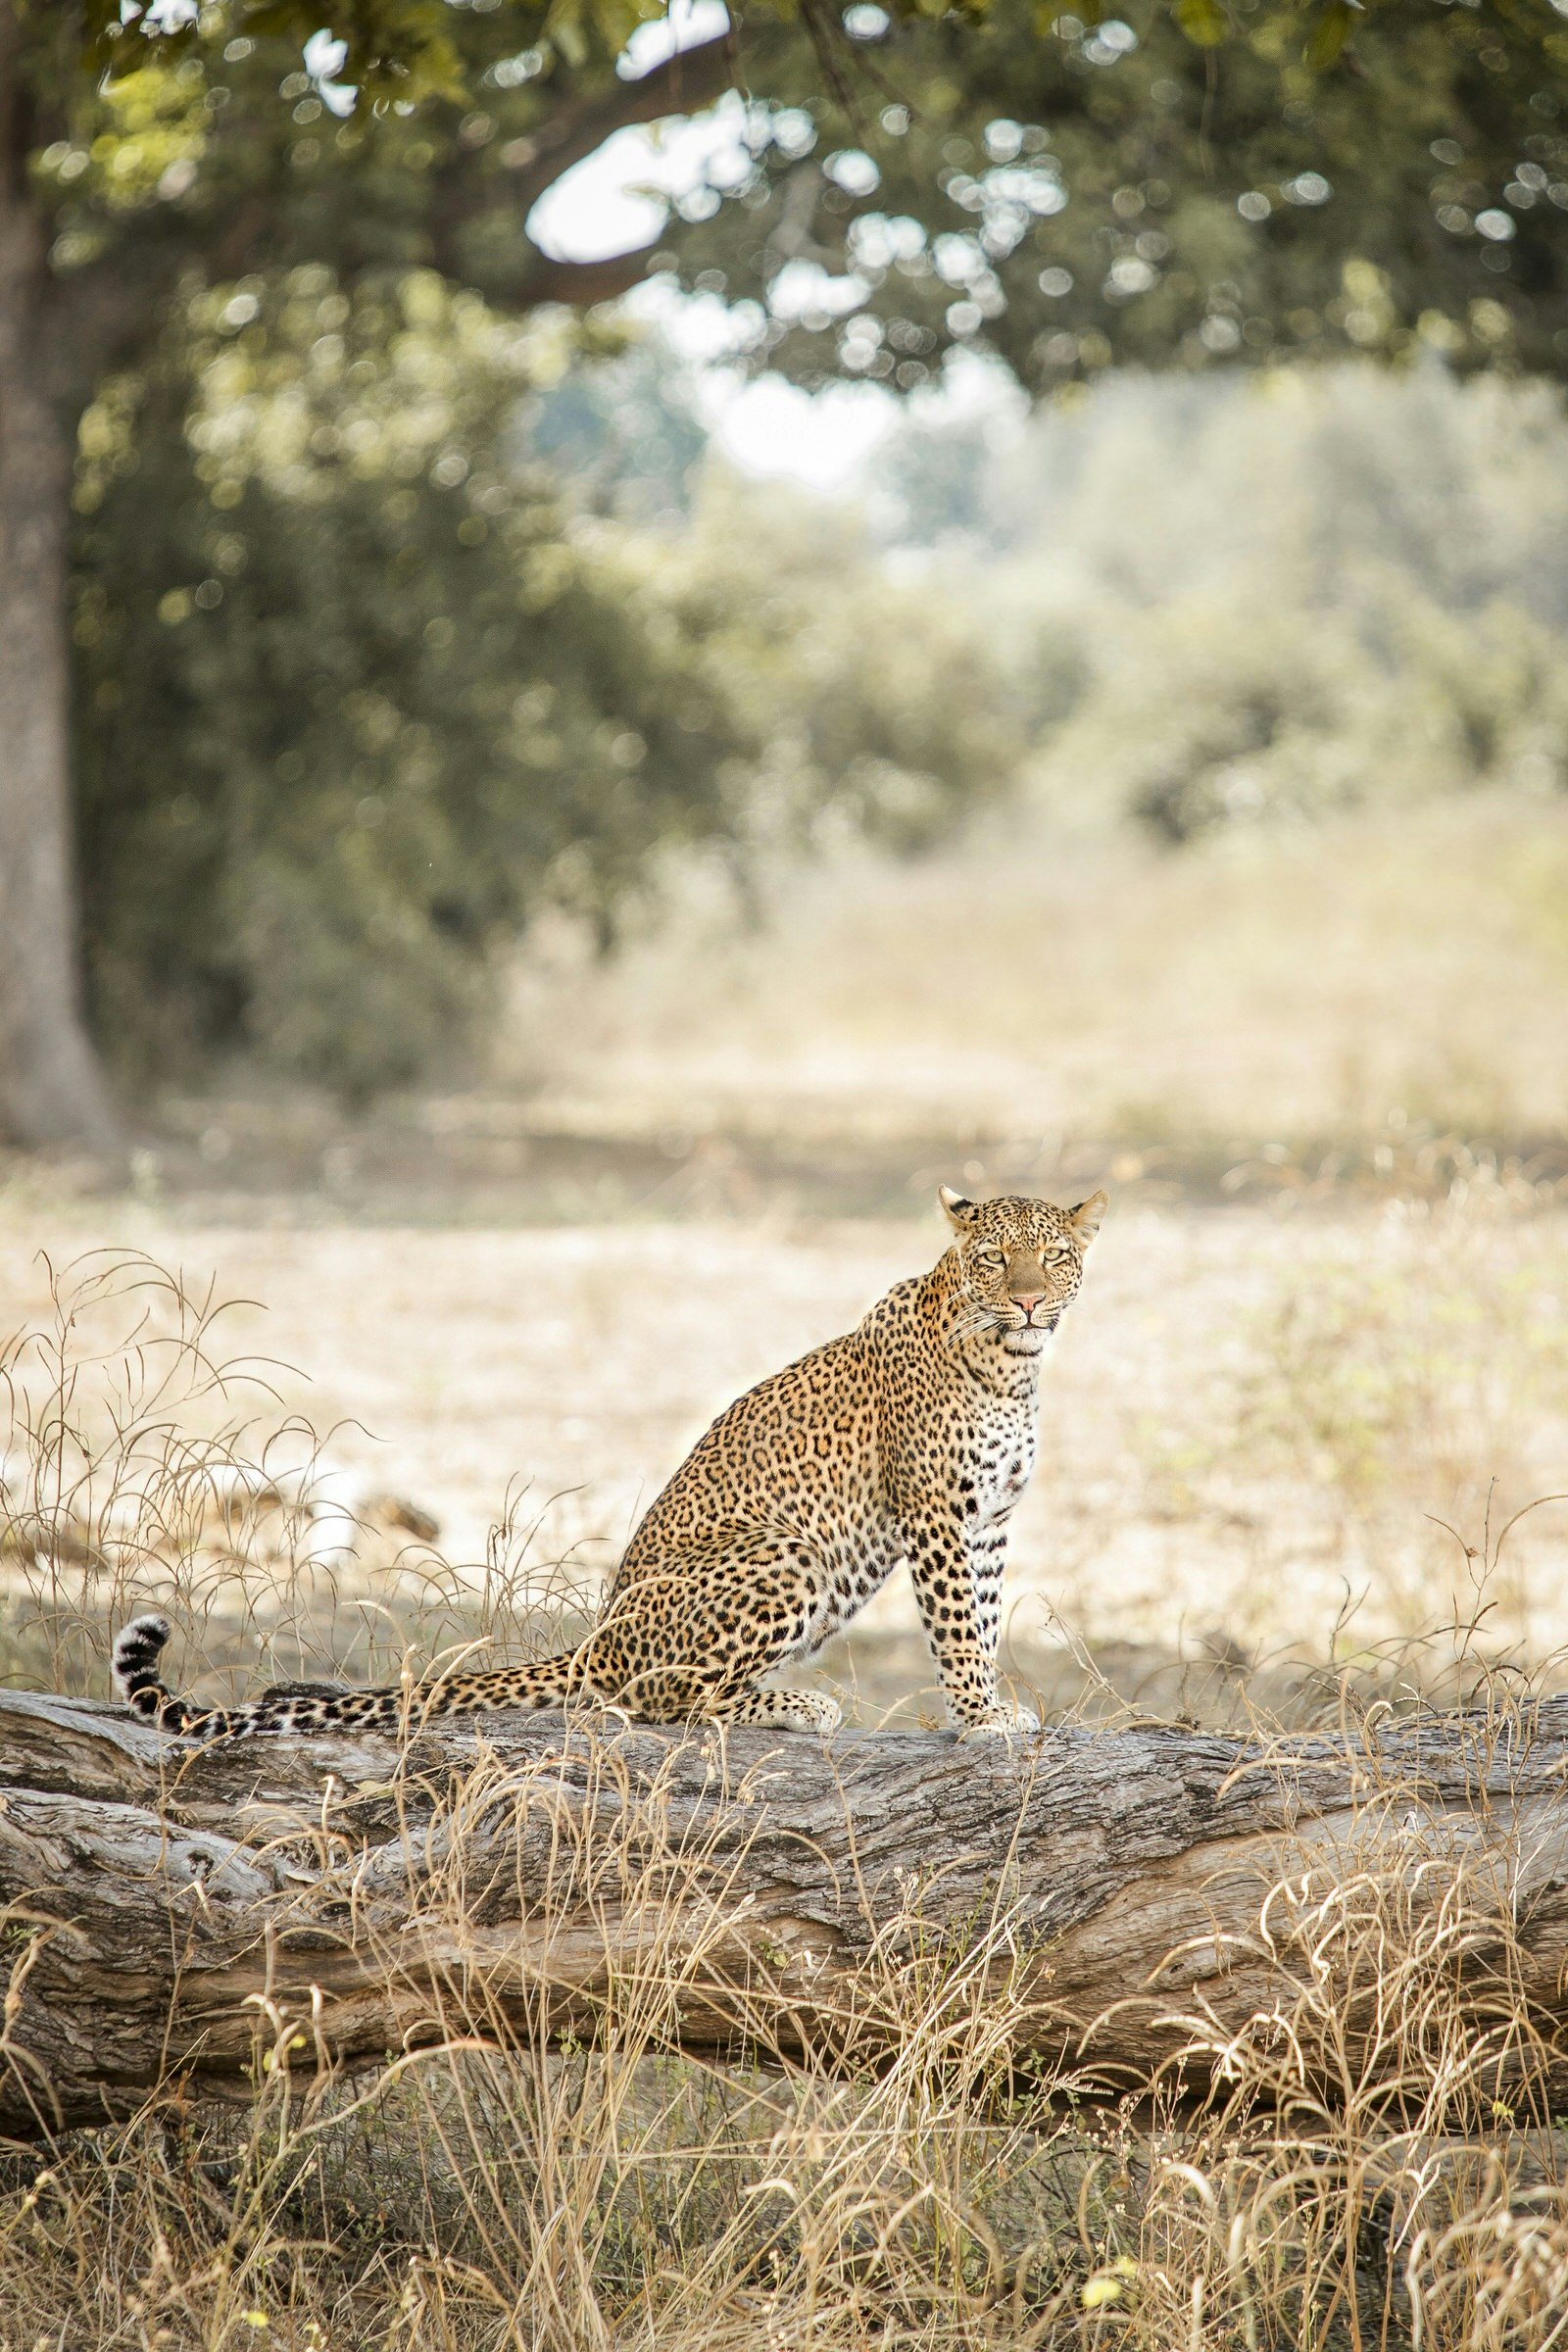 A leopardess looking for her cubs in Nsefu camp, South Luangwa National Park, Zambia © Philip Lee Harvey